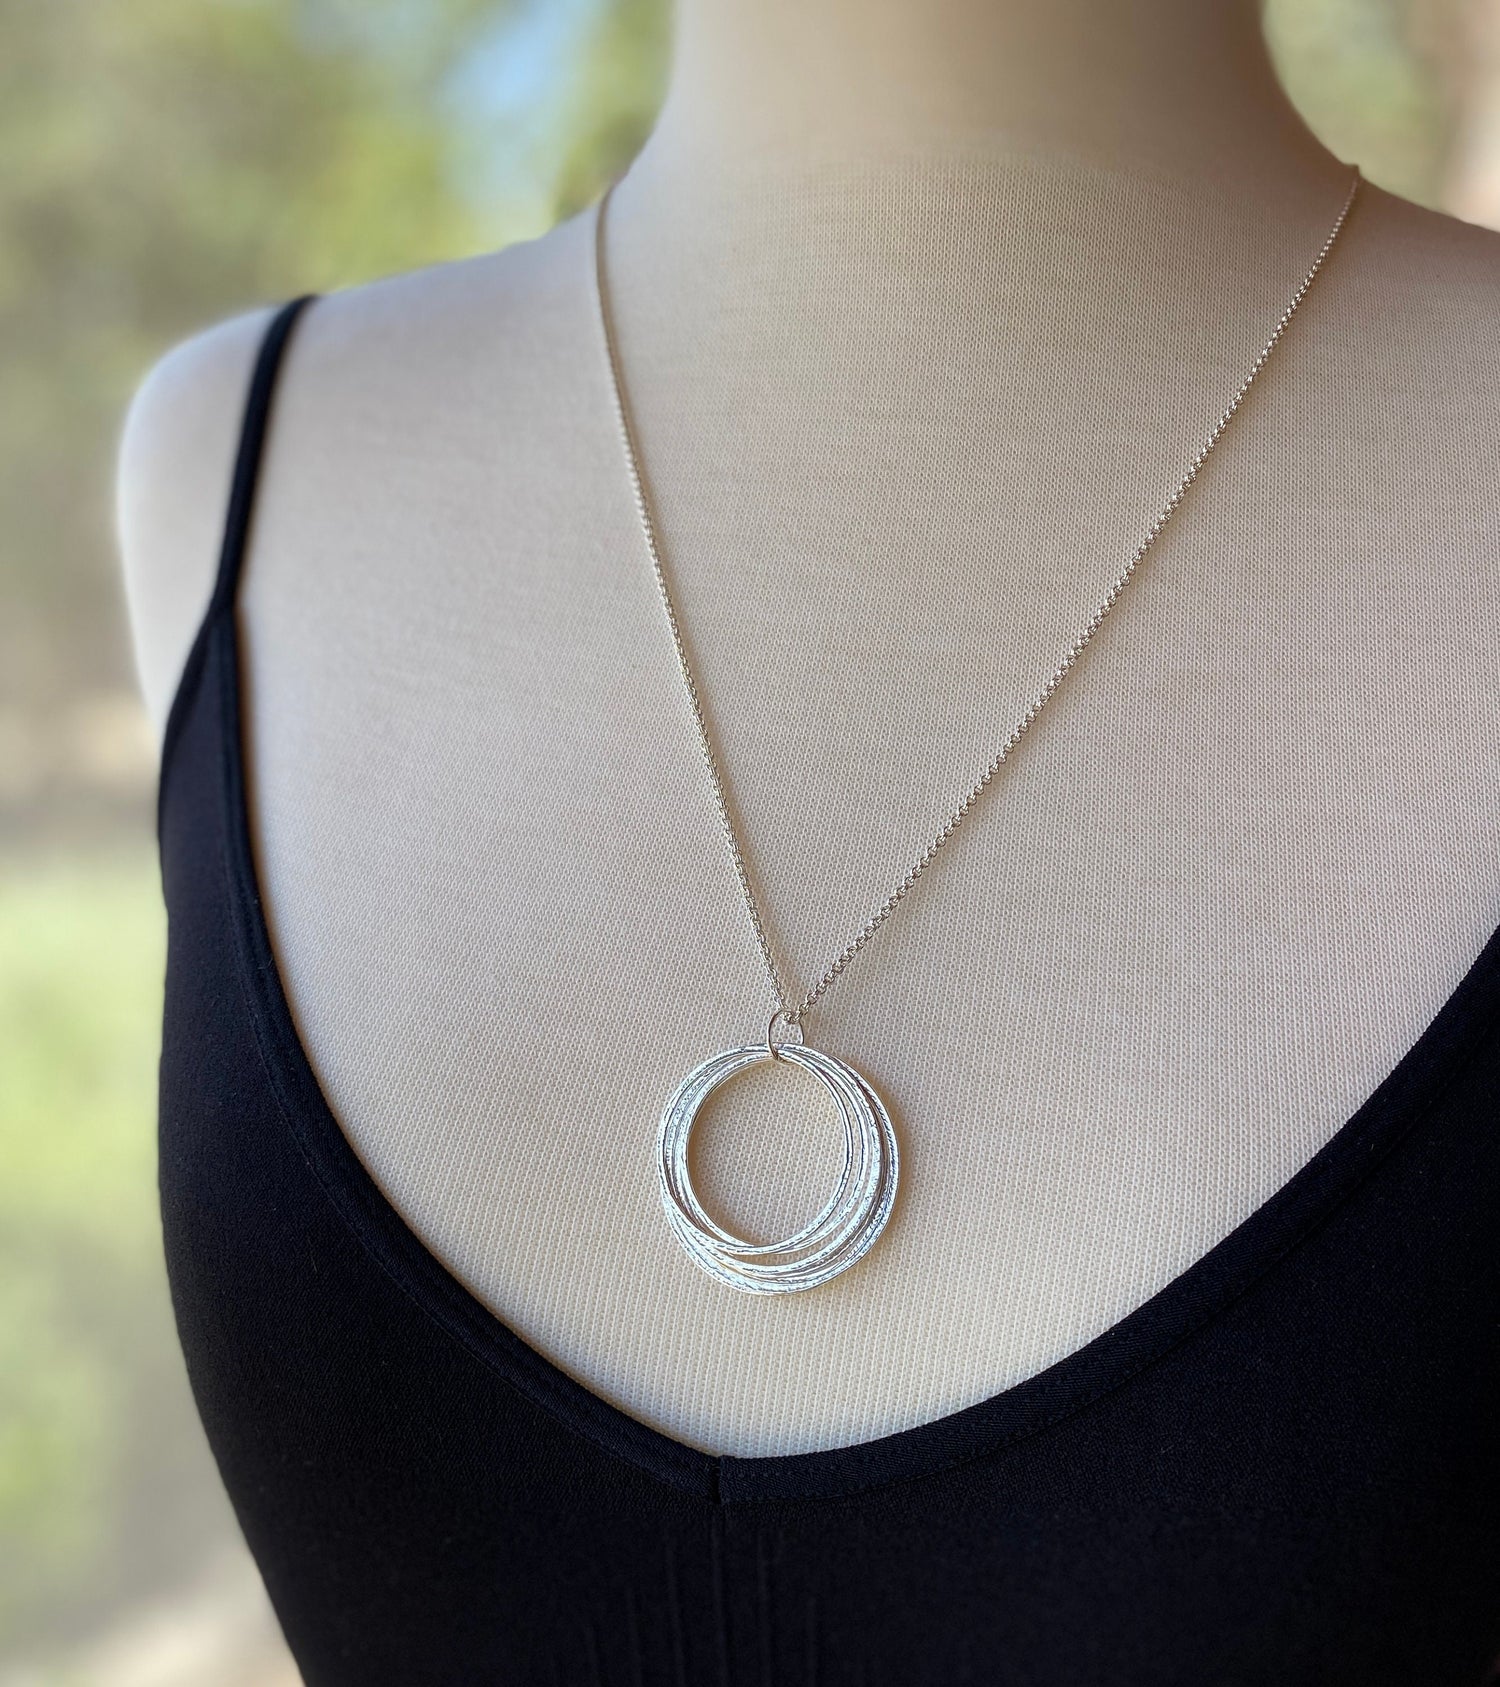 7 Circle 70th Birthday Milestone Necklace, Bold Sterling Silver Handcrafted Sparkly Circles Pendant, 7 Rings for 7 Decades, Large Circles